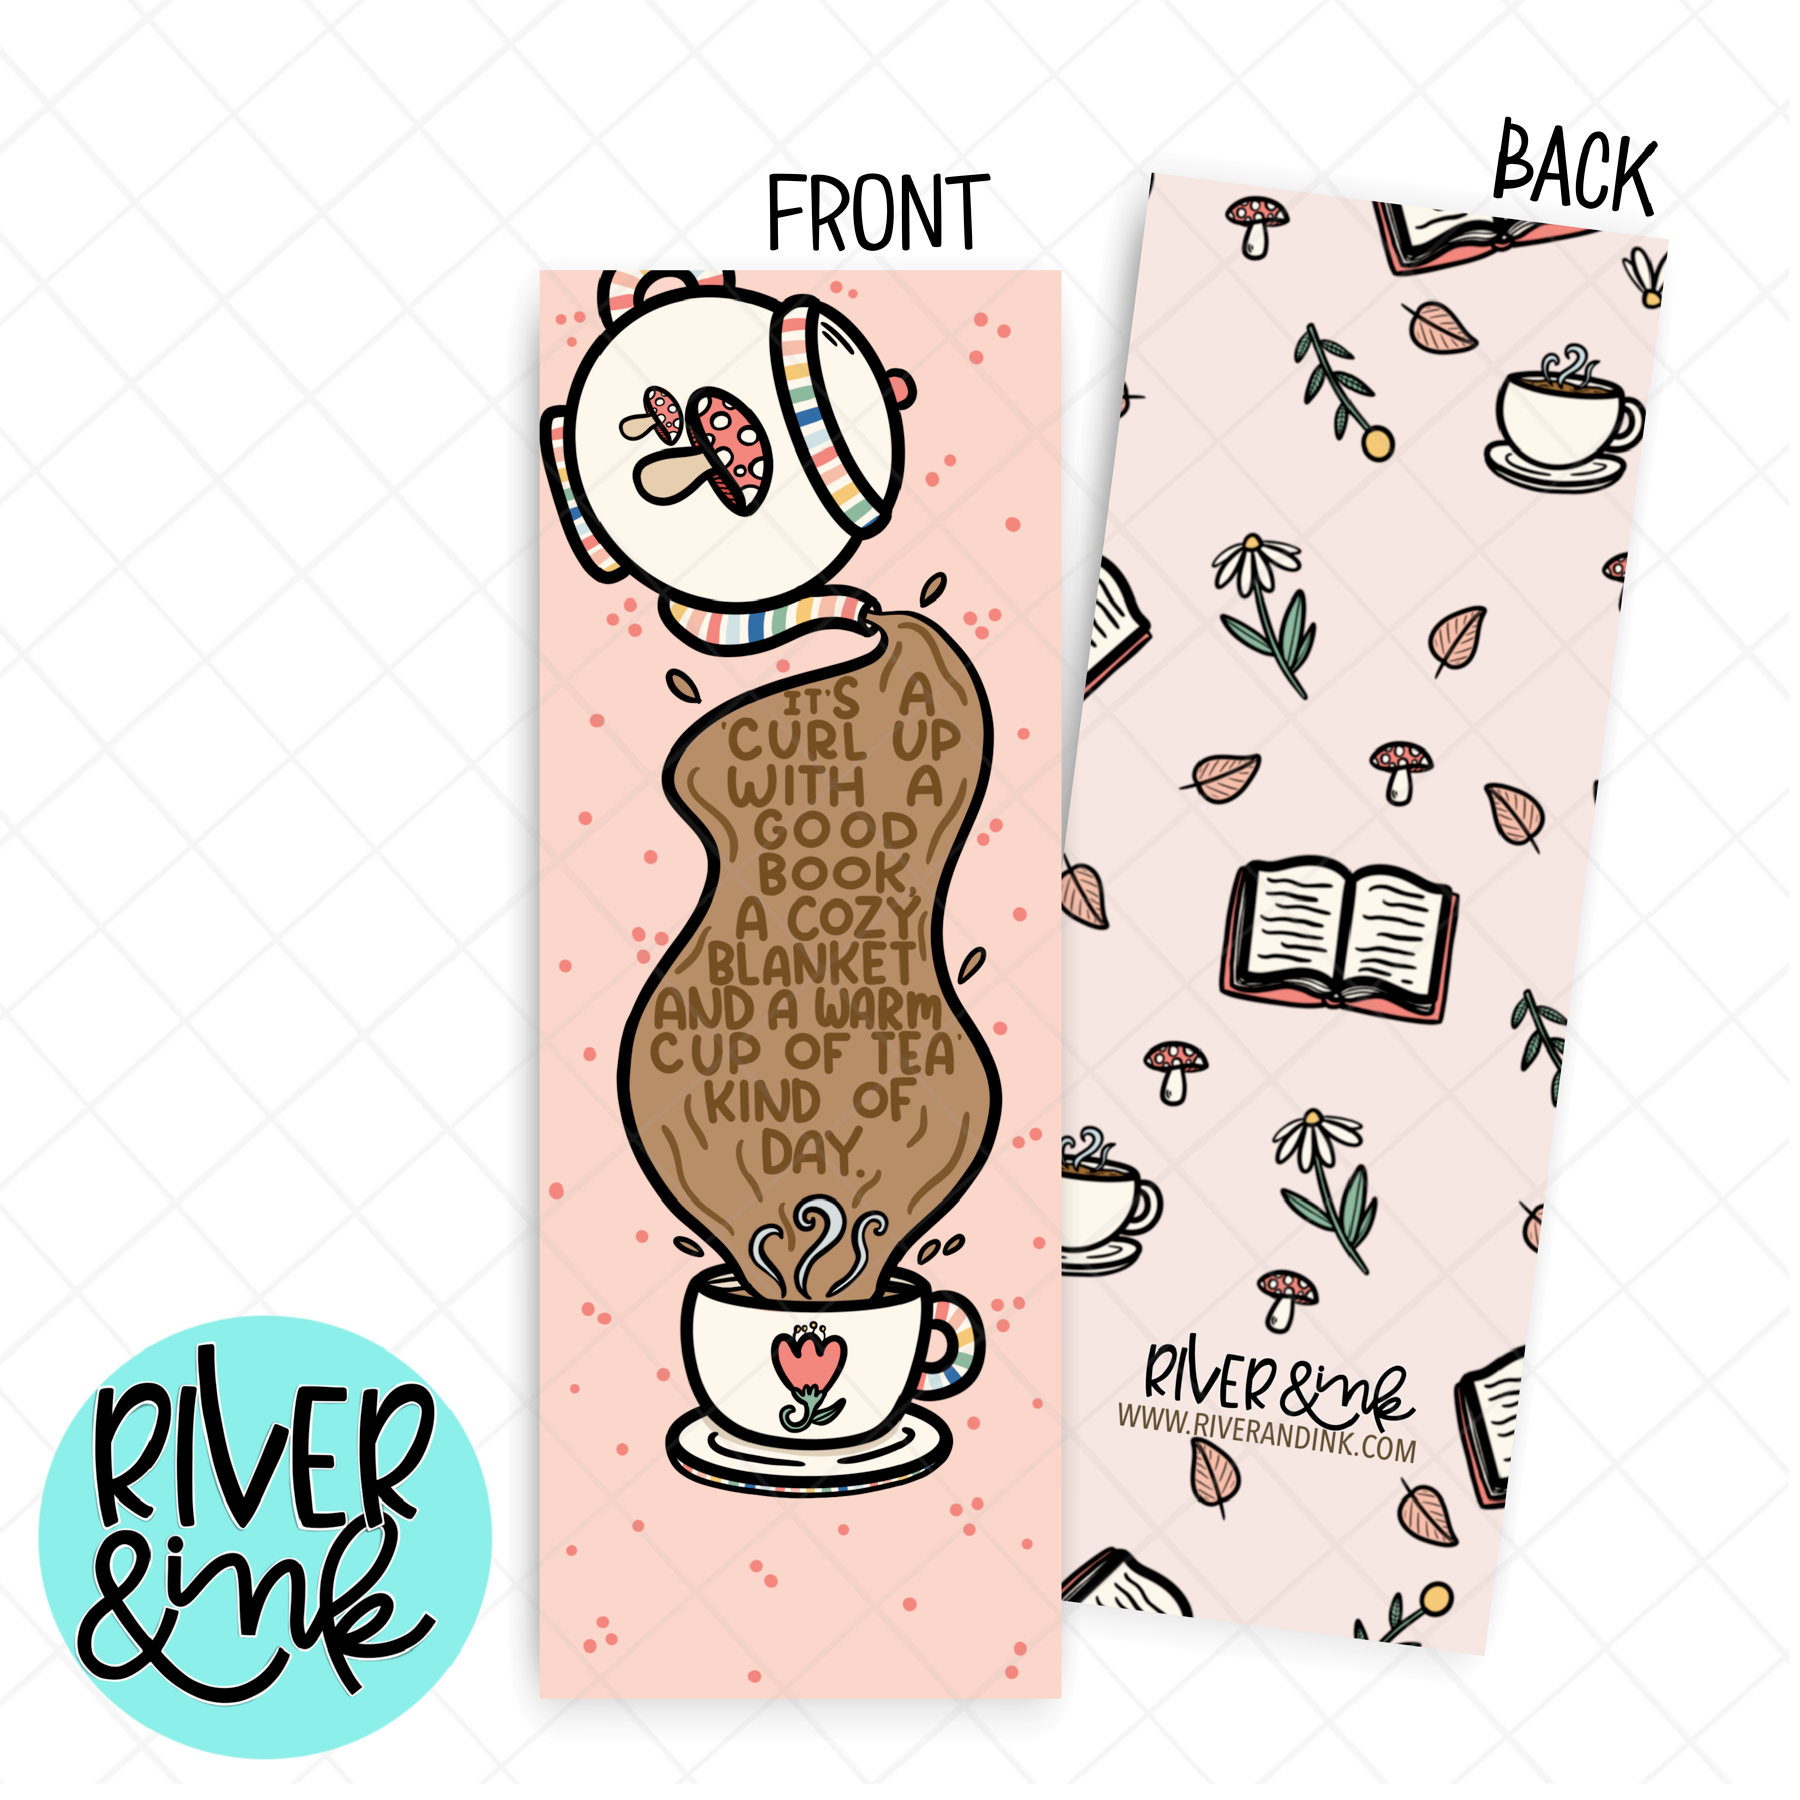 Tea, Books, and Blankets Kind of Day | Hand Drawn Bookmark